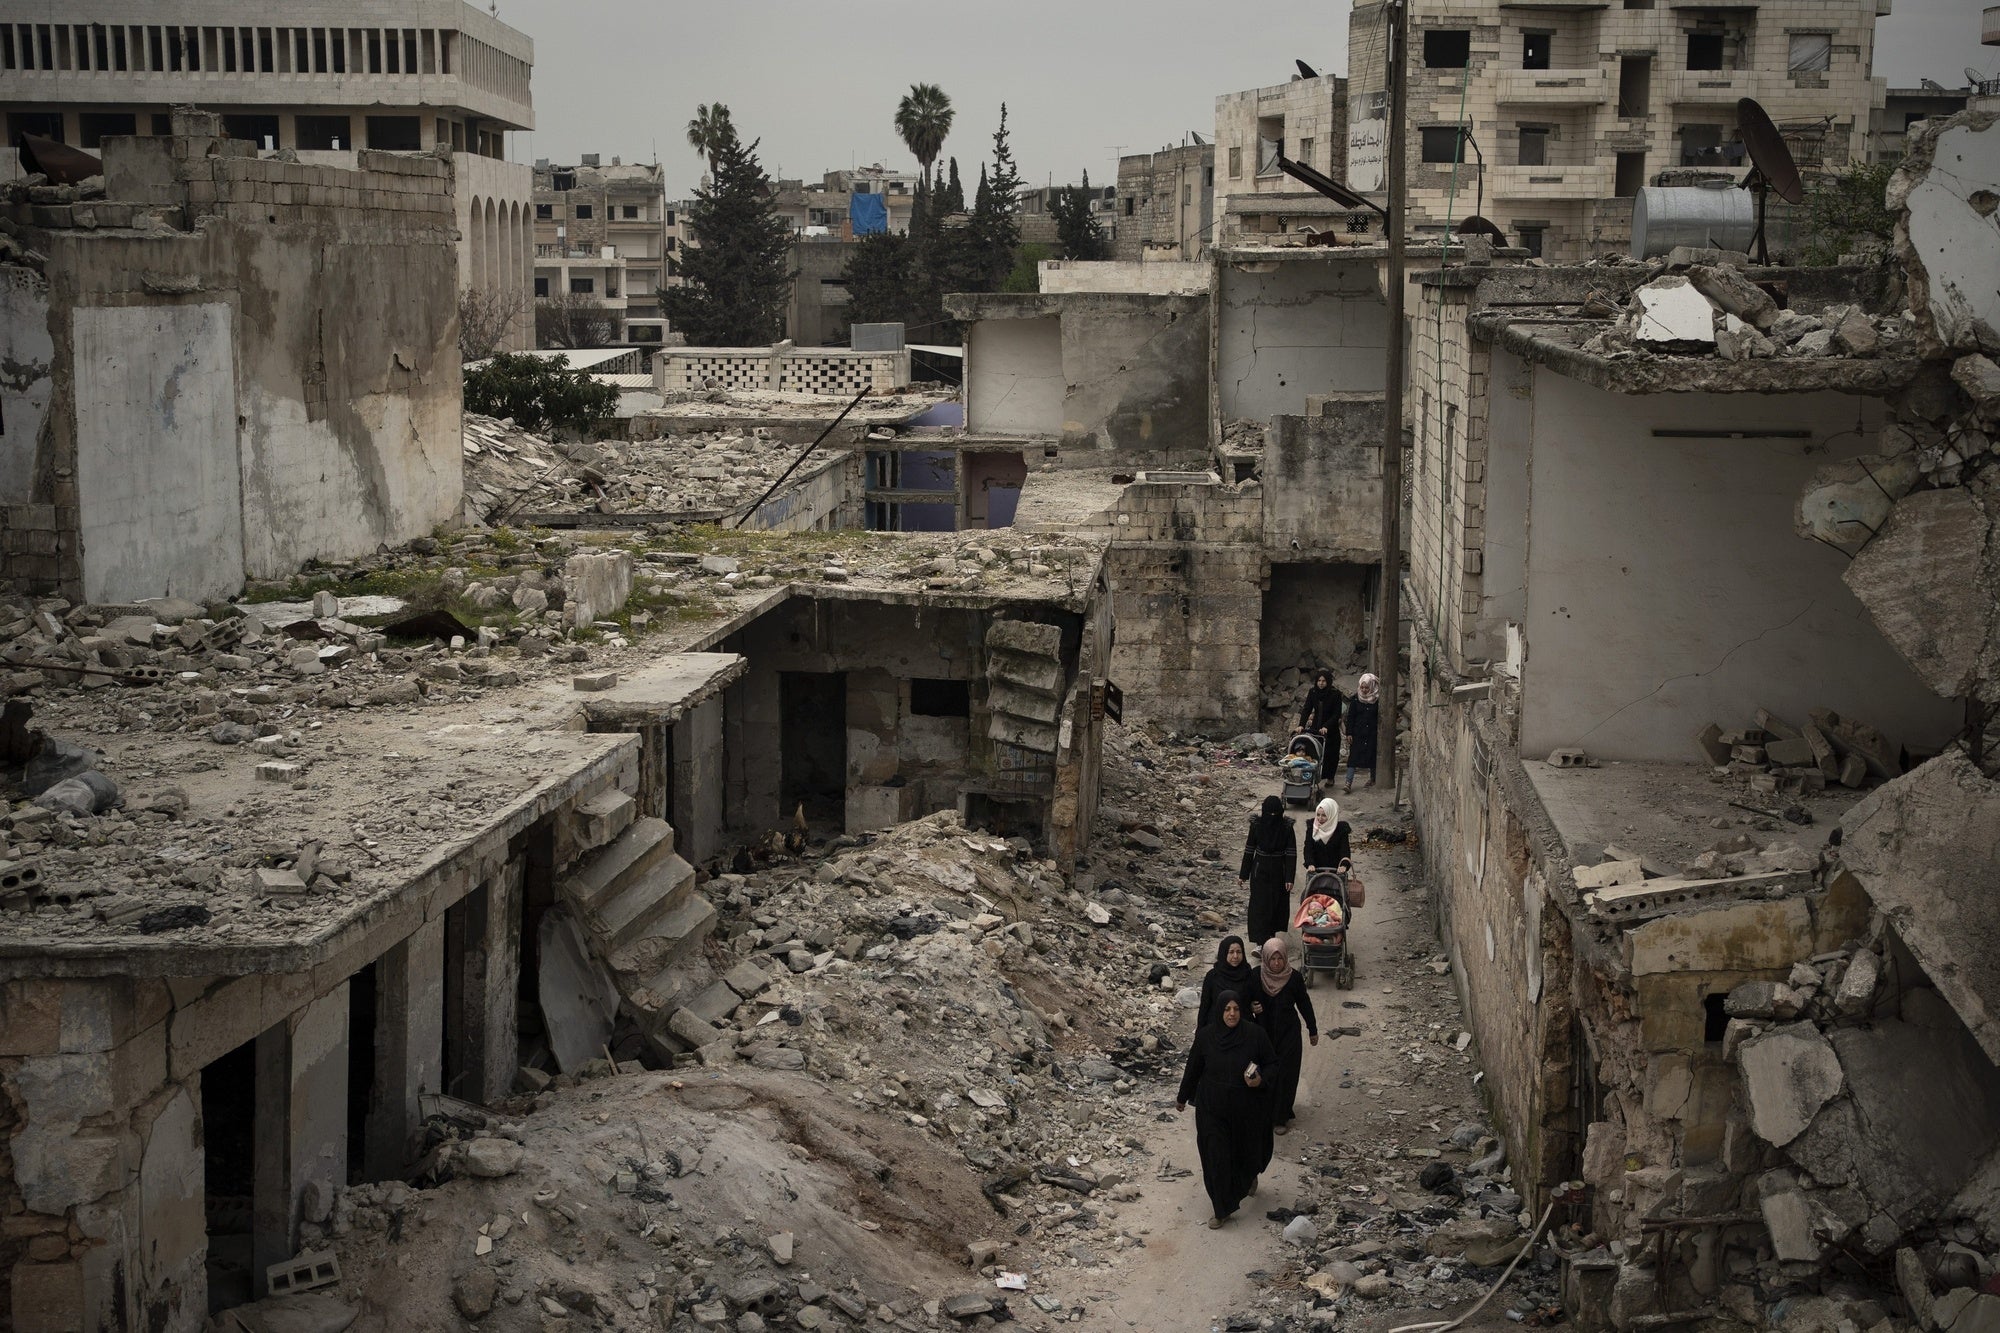 Women walk in a neighborhood heavily damaged by airstrikes in Idlib, Syria on March 12, 2020. Idlib governorate is the last area under anti-government control in Syria. 